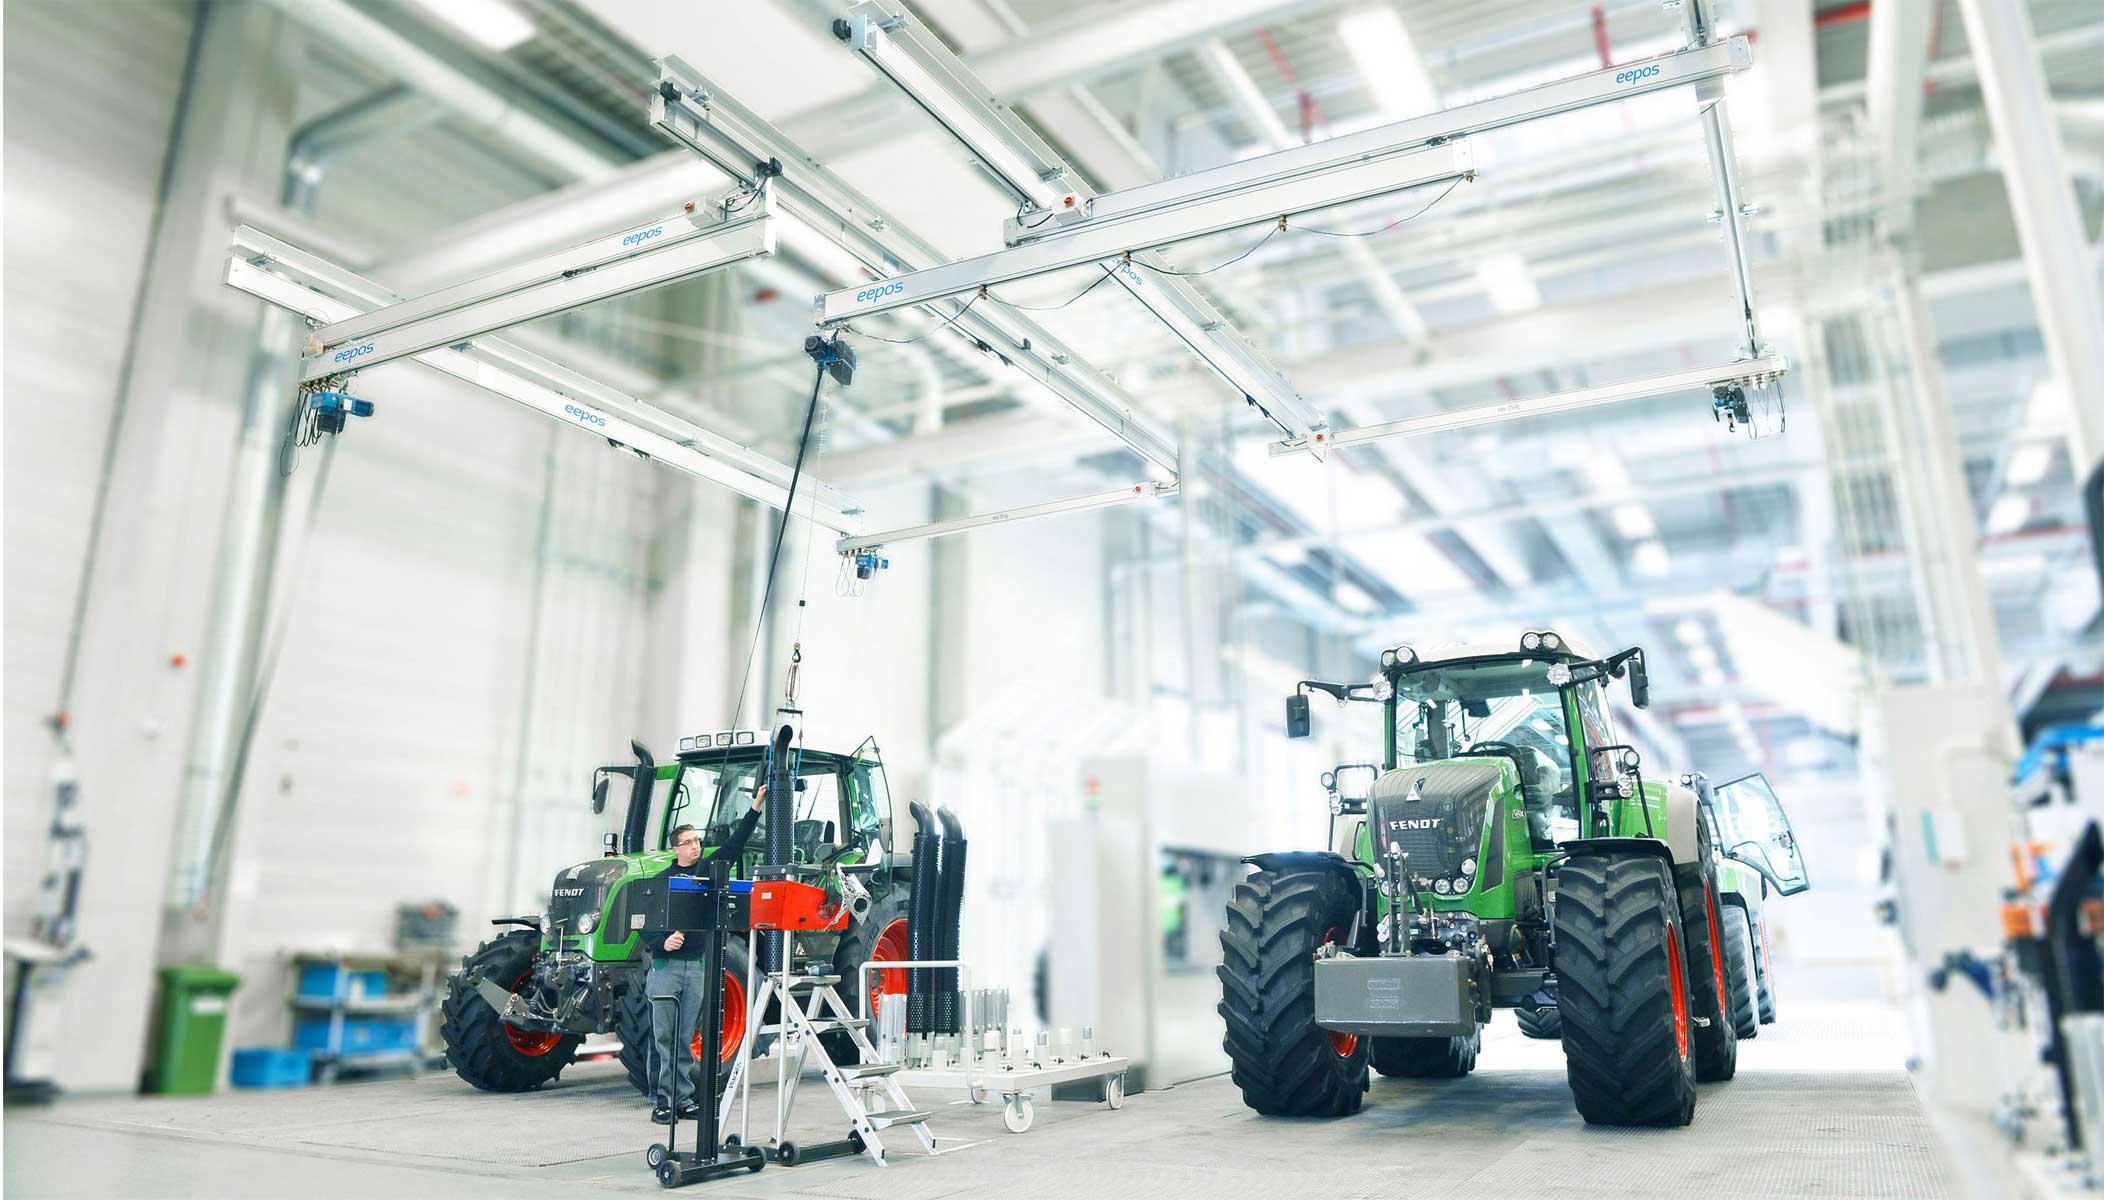 eepos crane systems in the Fendt tractor factory